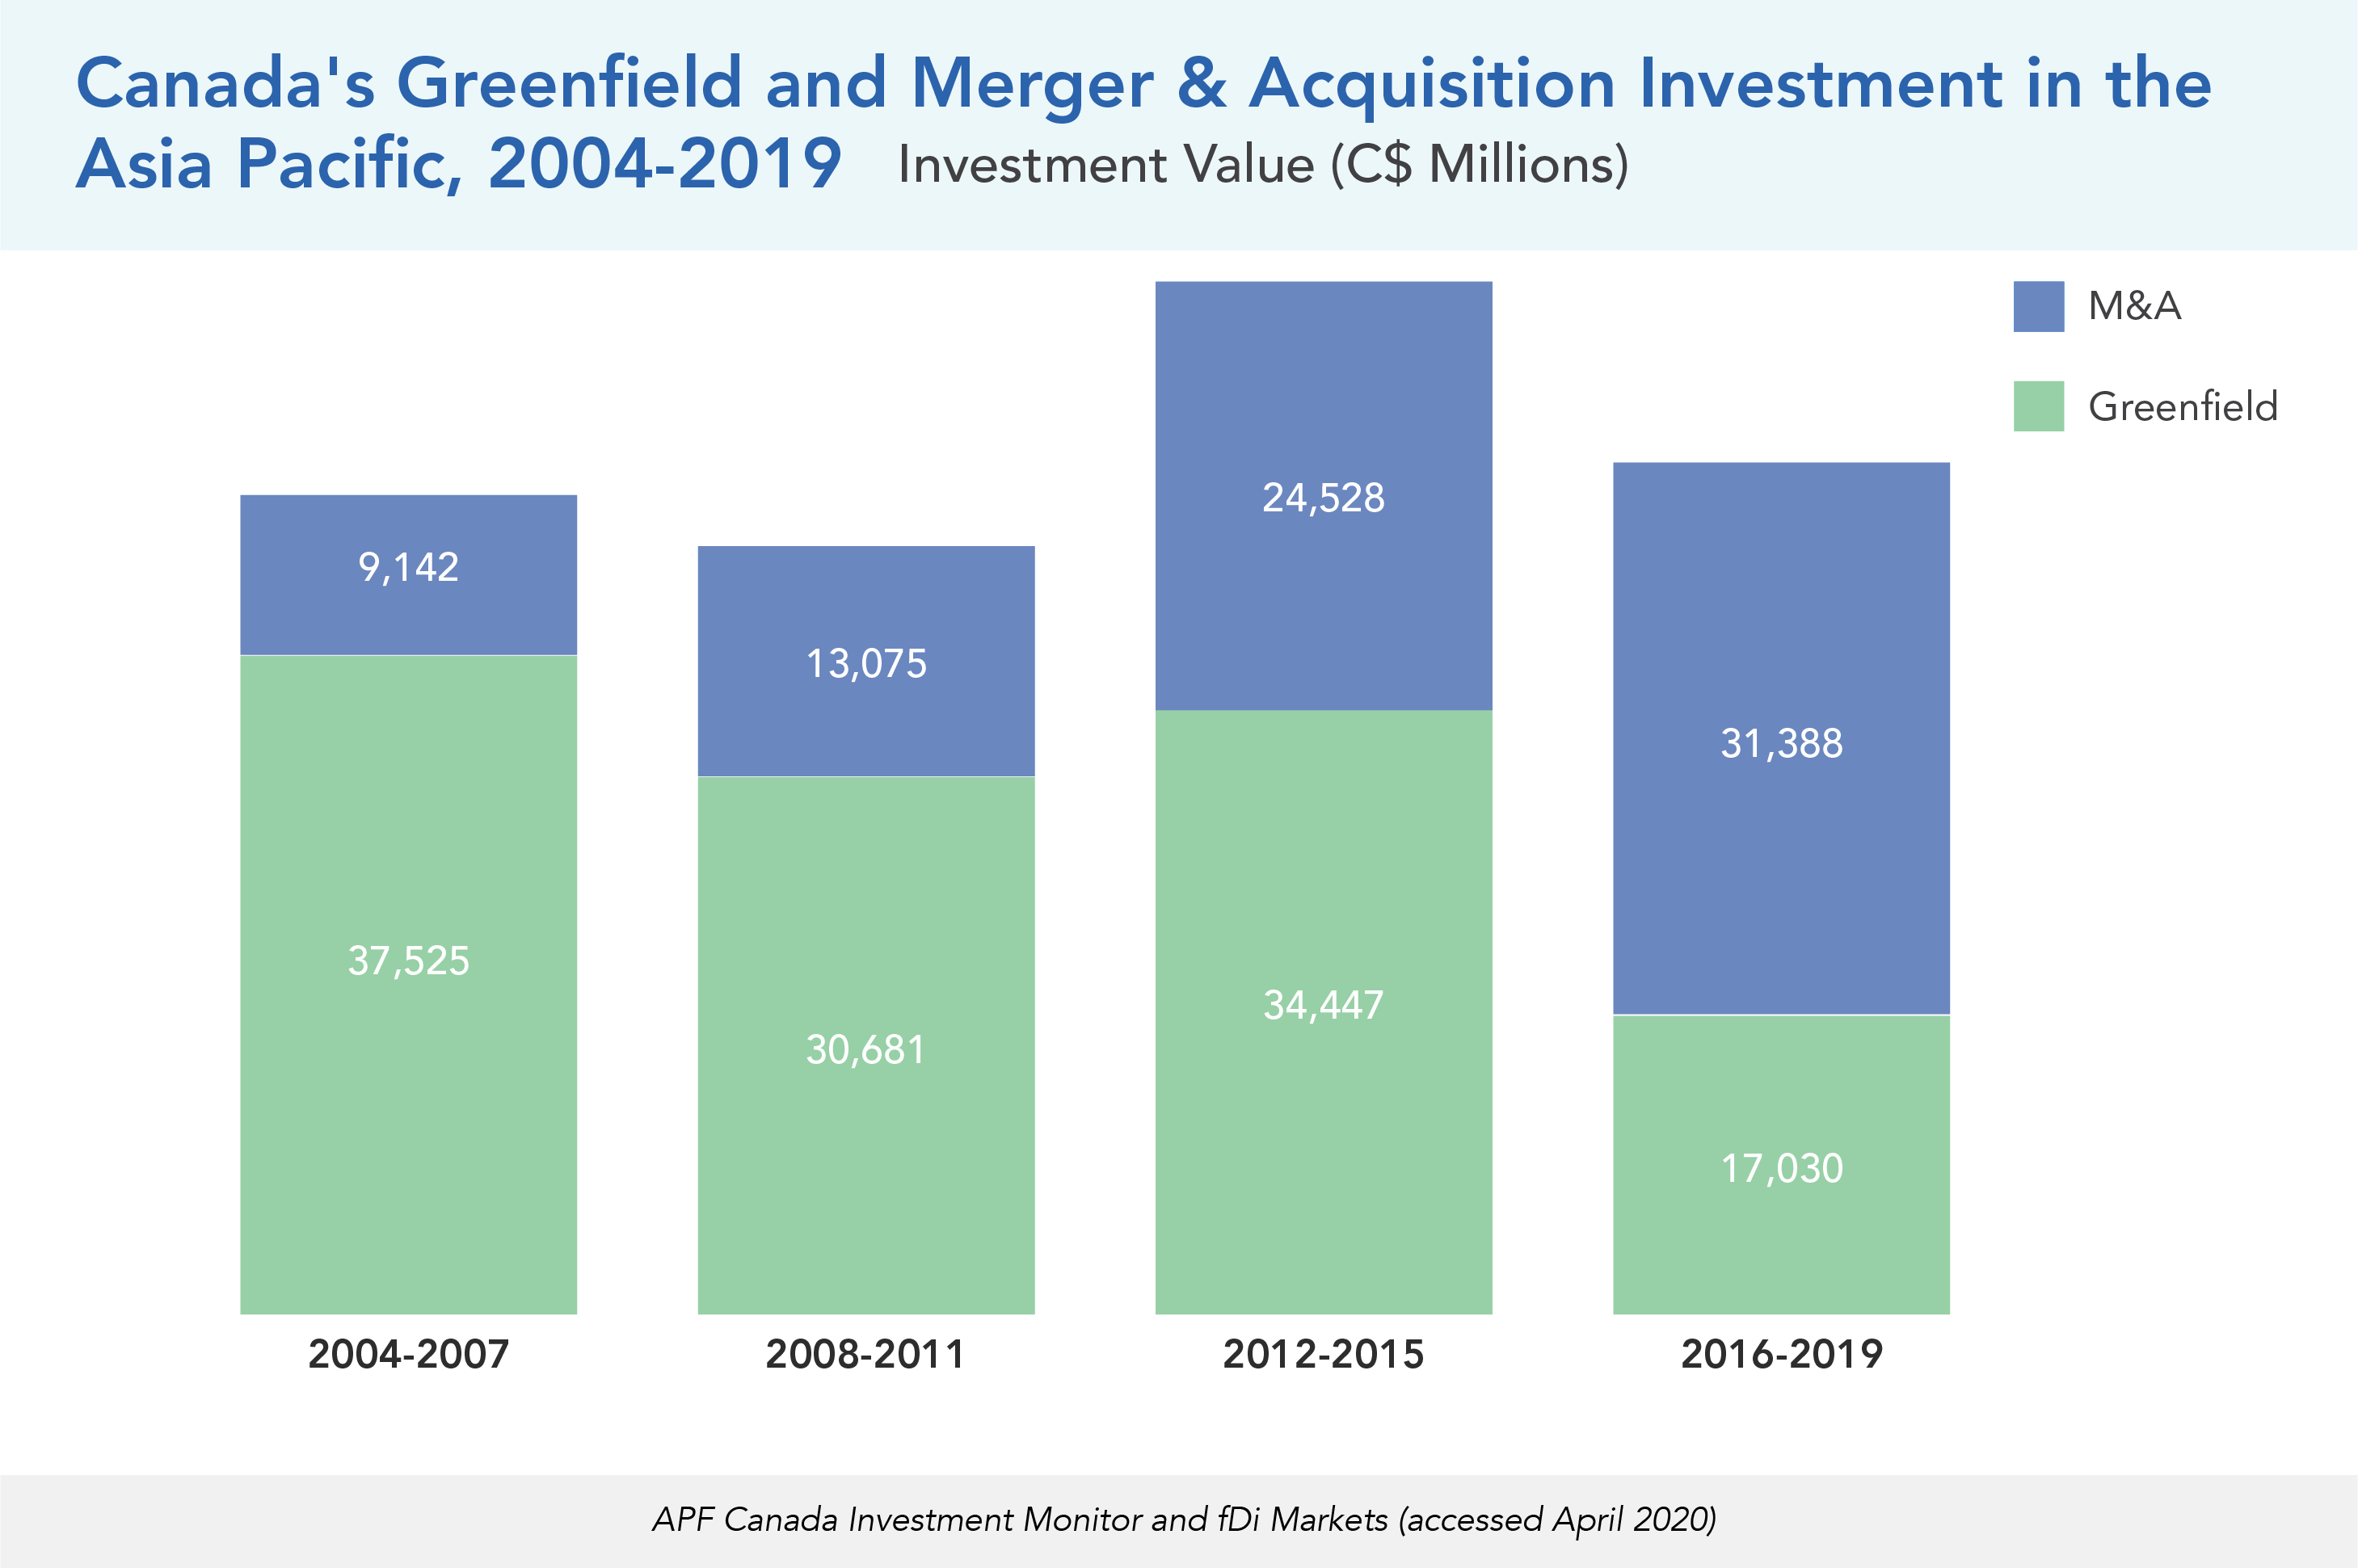 Canada's Greenfield and Merger & Acquisition Investment in the Asia Pacific, 2004-2019